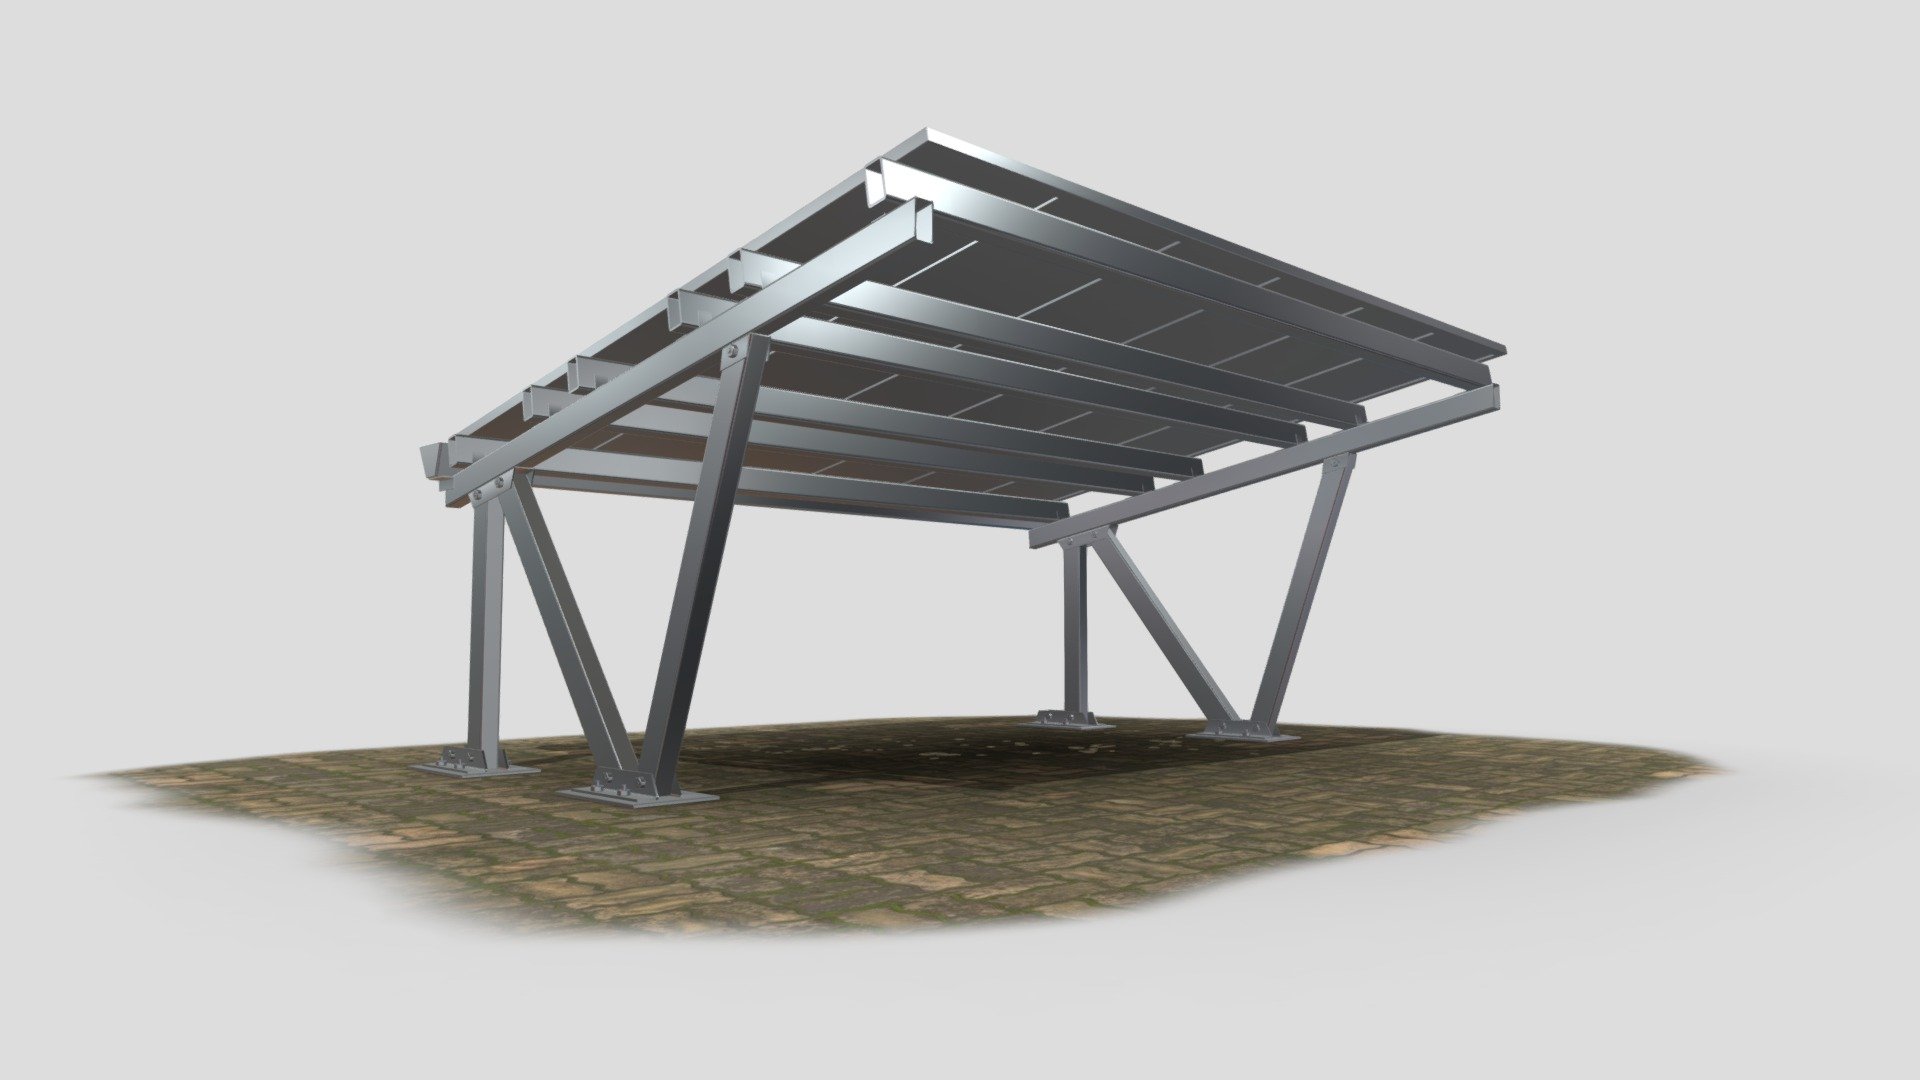 Carport with Solar Cells To model your products, please visit this account on fiverr https://www.fiverr.com/msfedawy Contact me if you want any modifications to this model. Or if you want to build a different model. G-mail: msfedawy@gmail.com - Carport with Solar Cells - 3D model by Fedawy 3d model